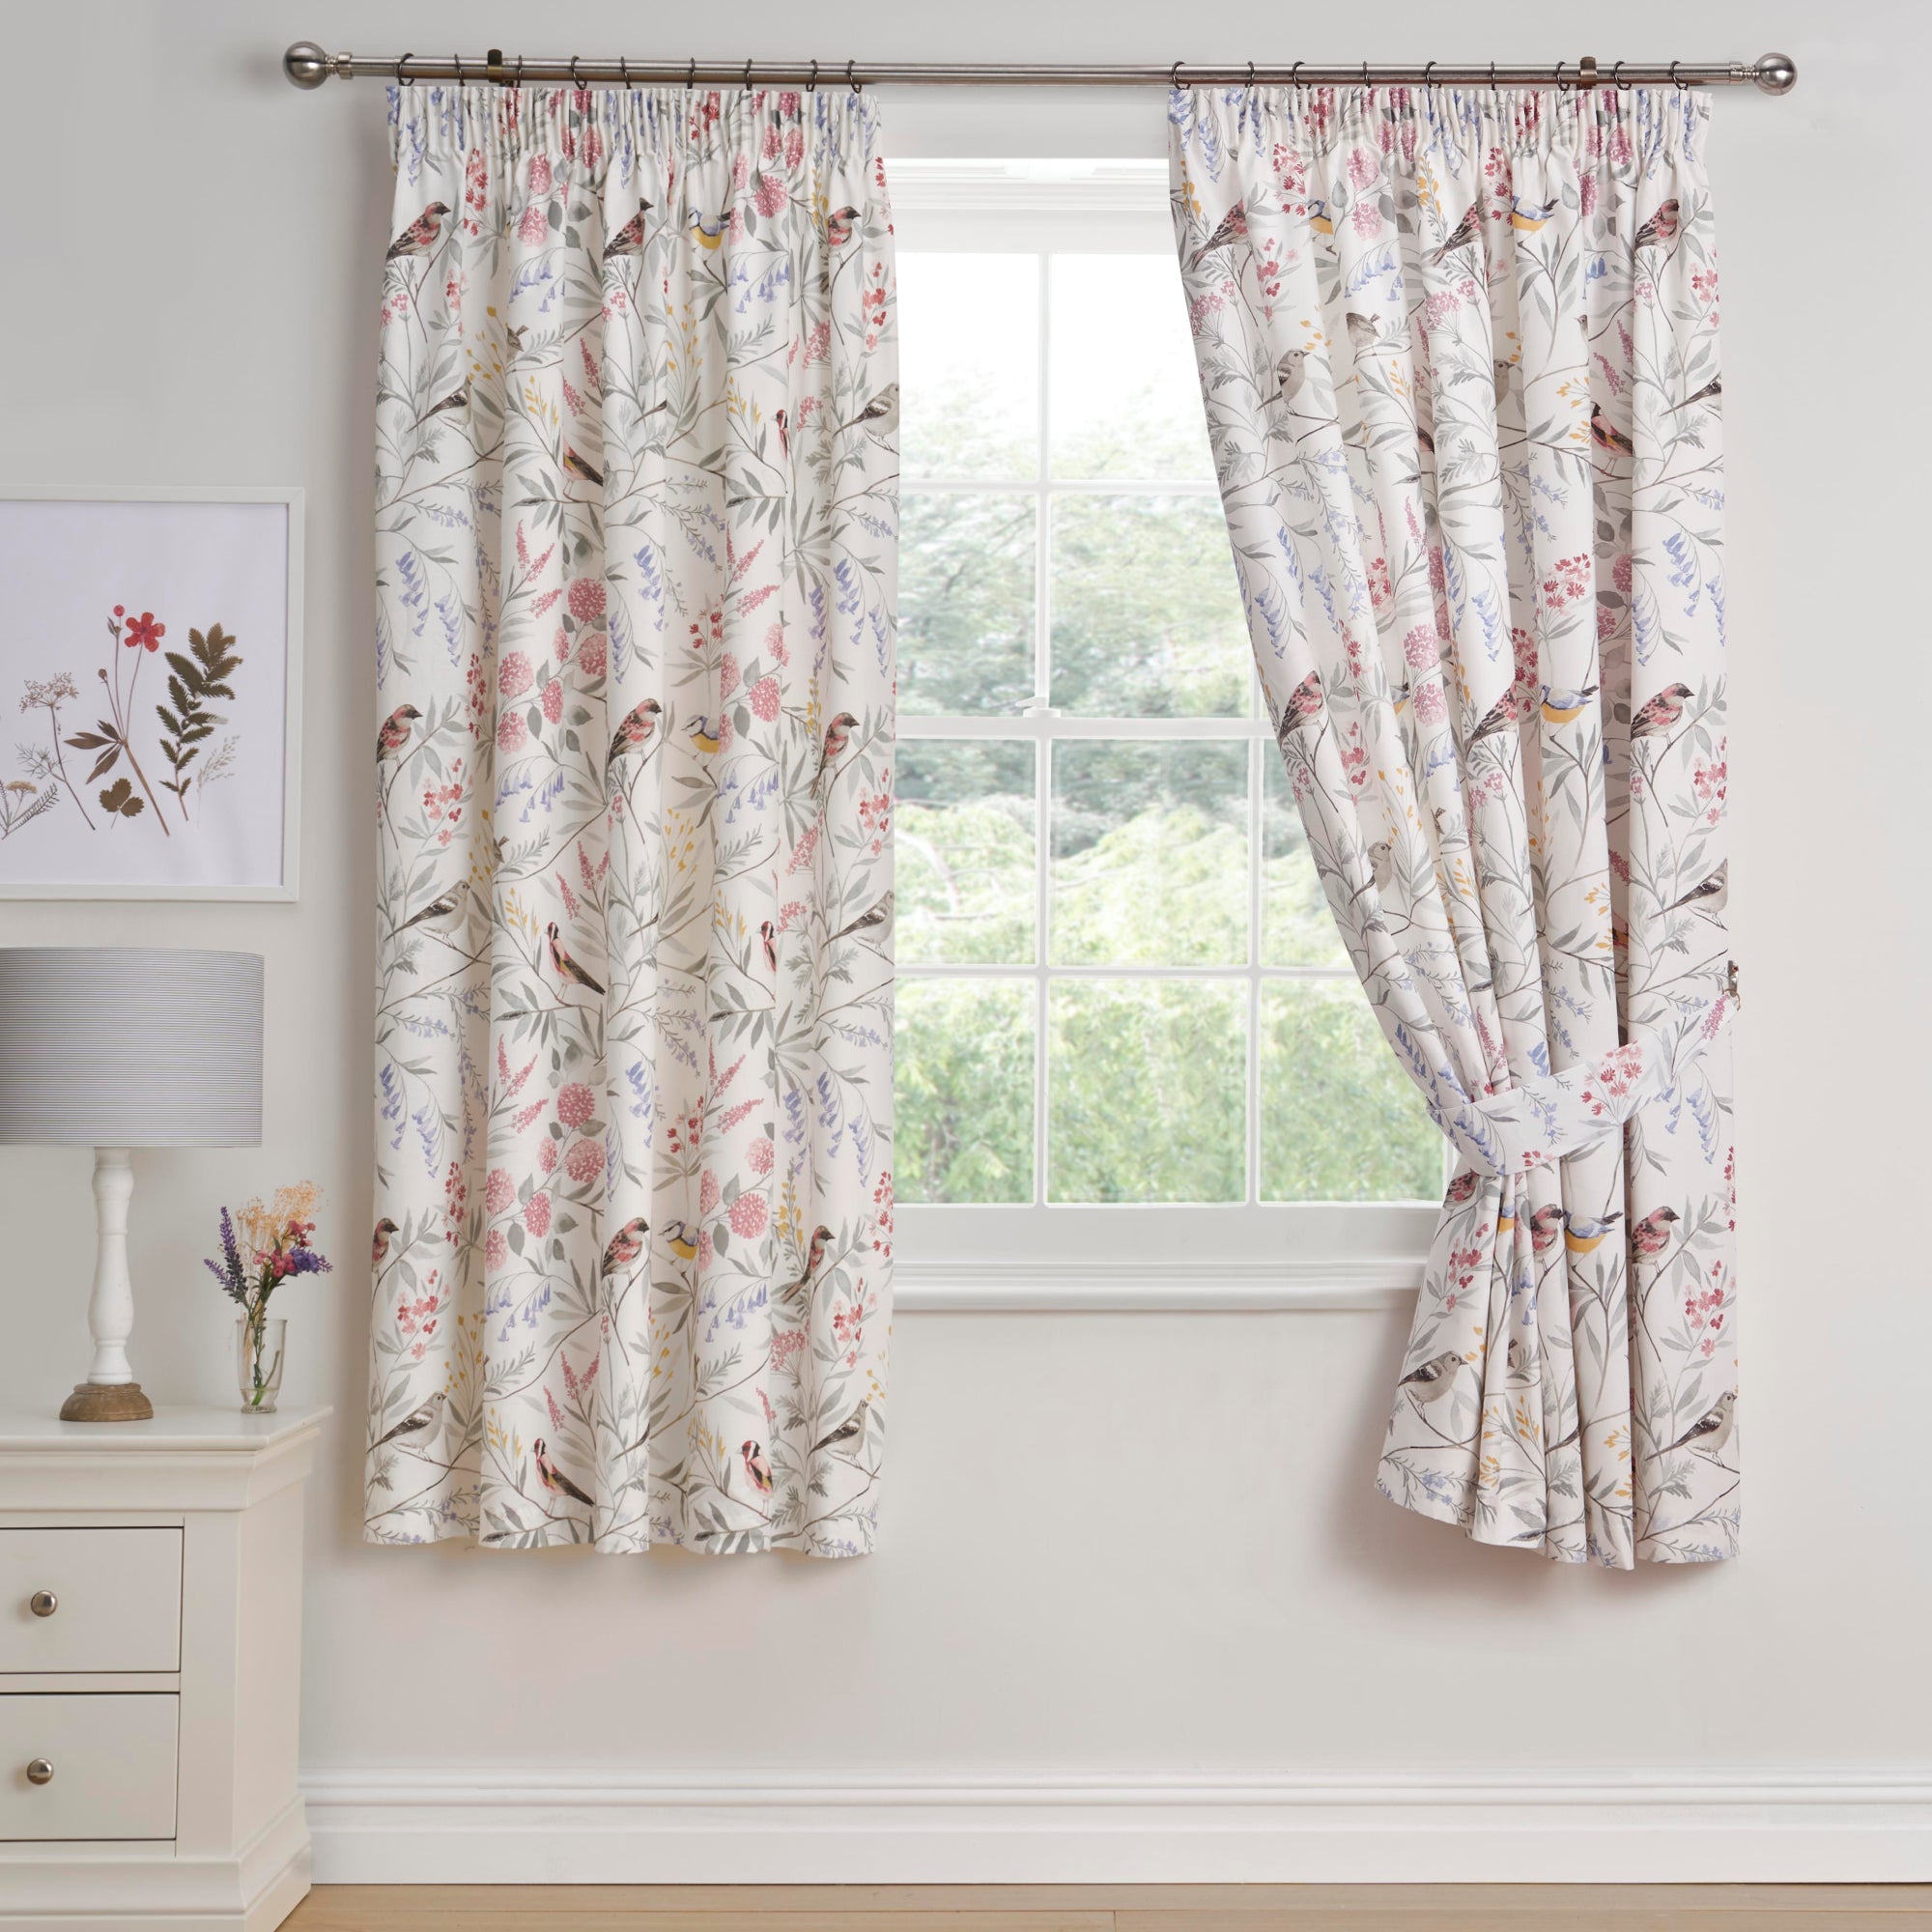 Pair of Pencil Pleat Curtains Caraway by Dreams & Drapes Design in Pink